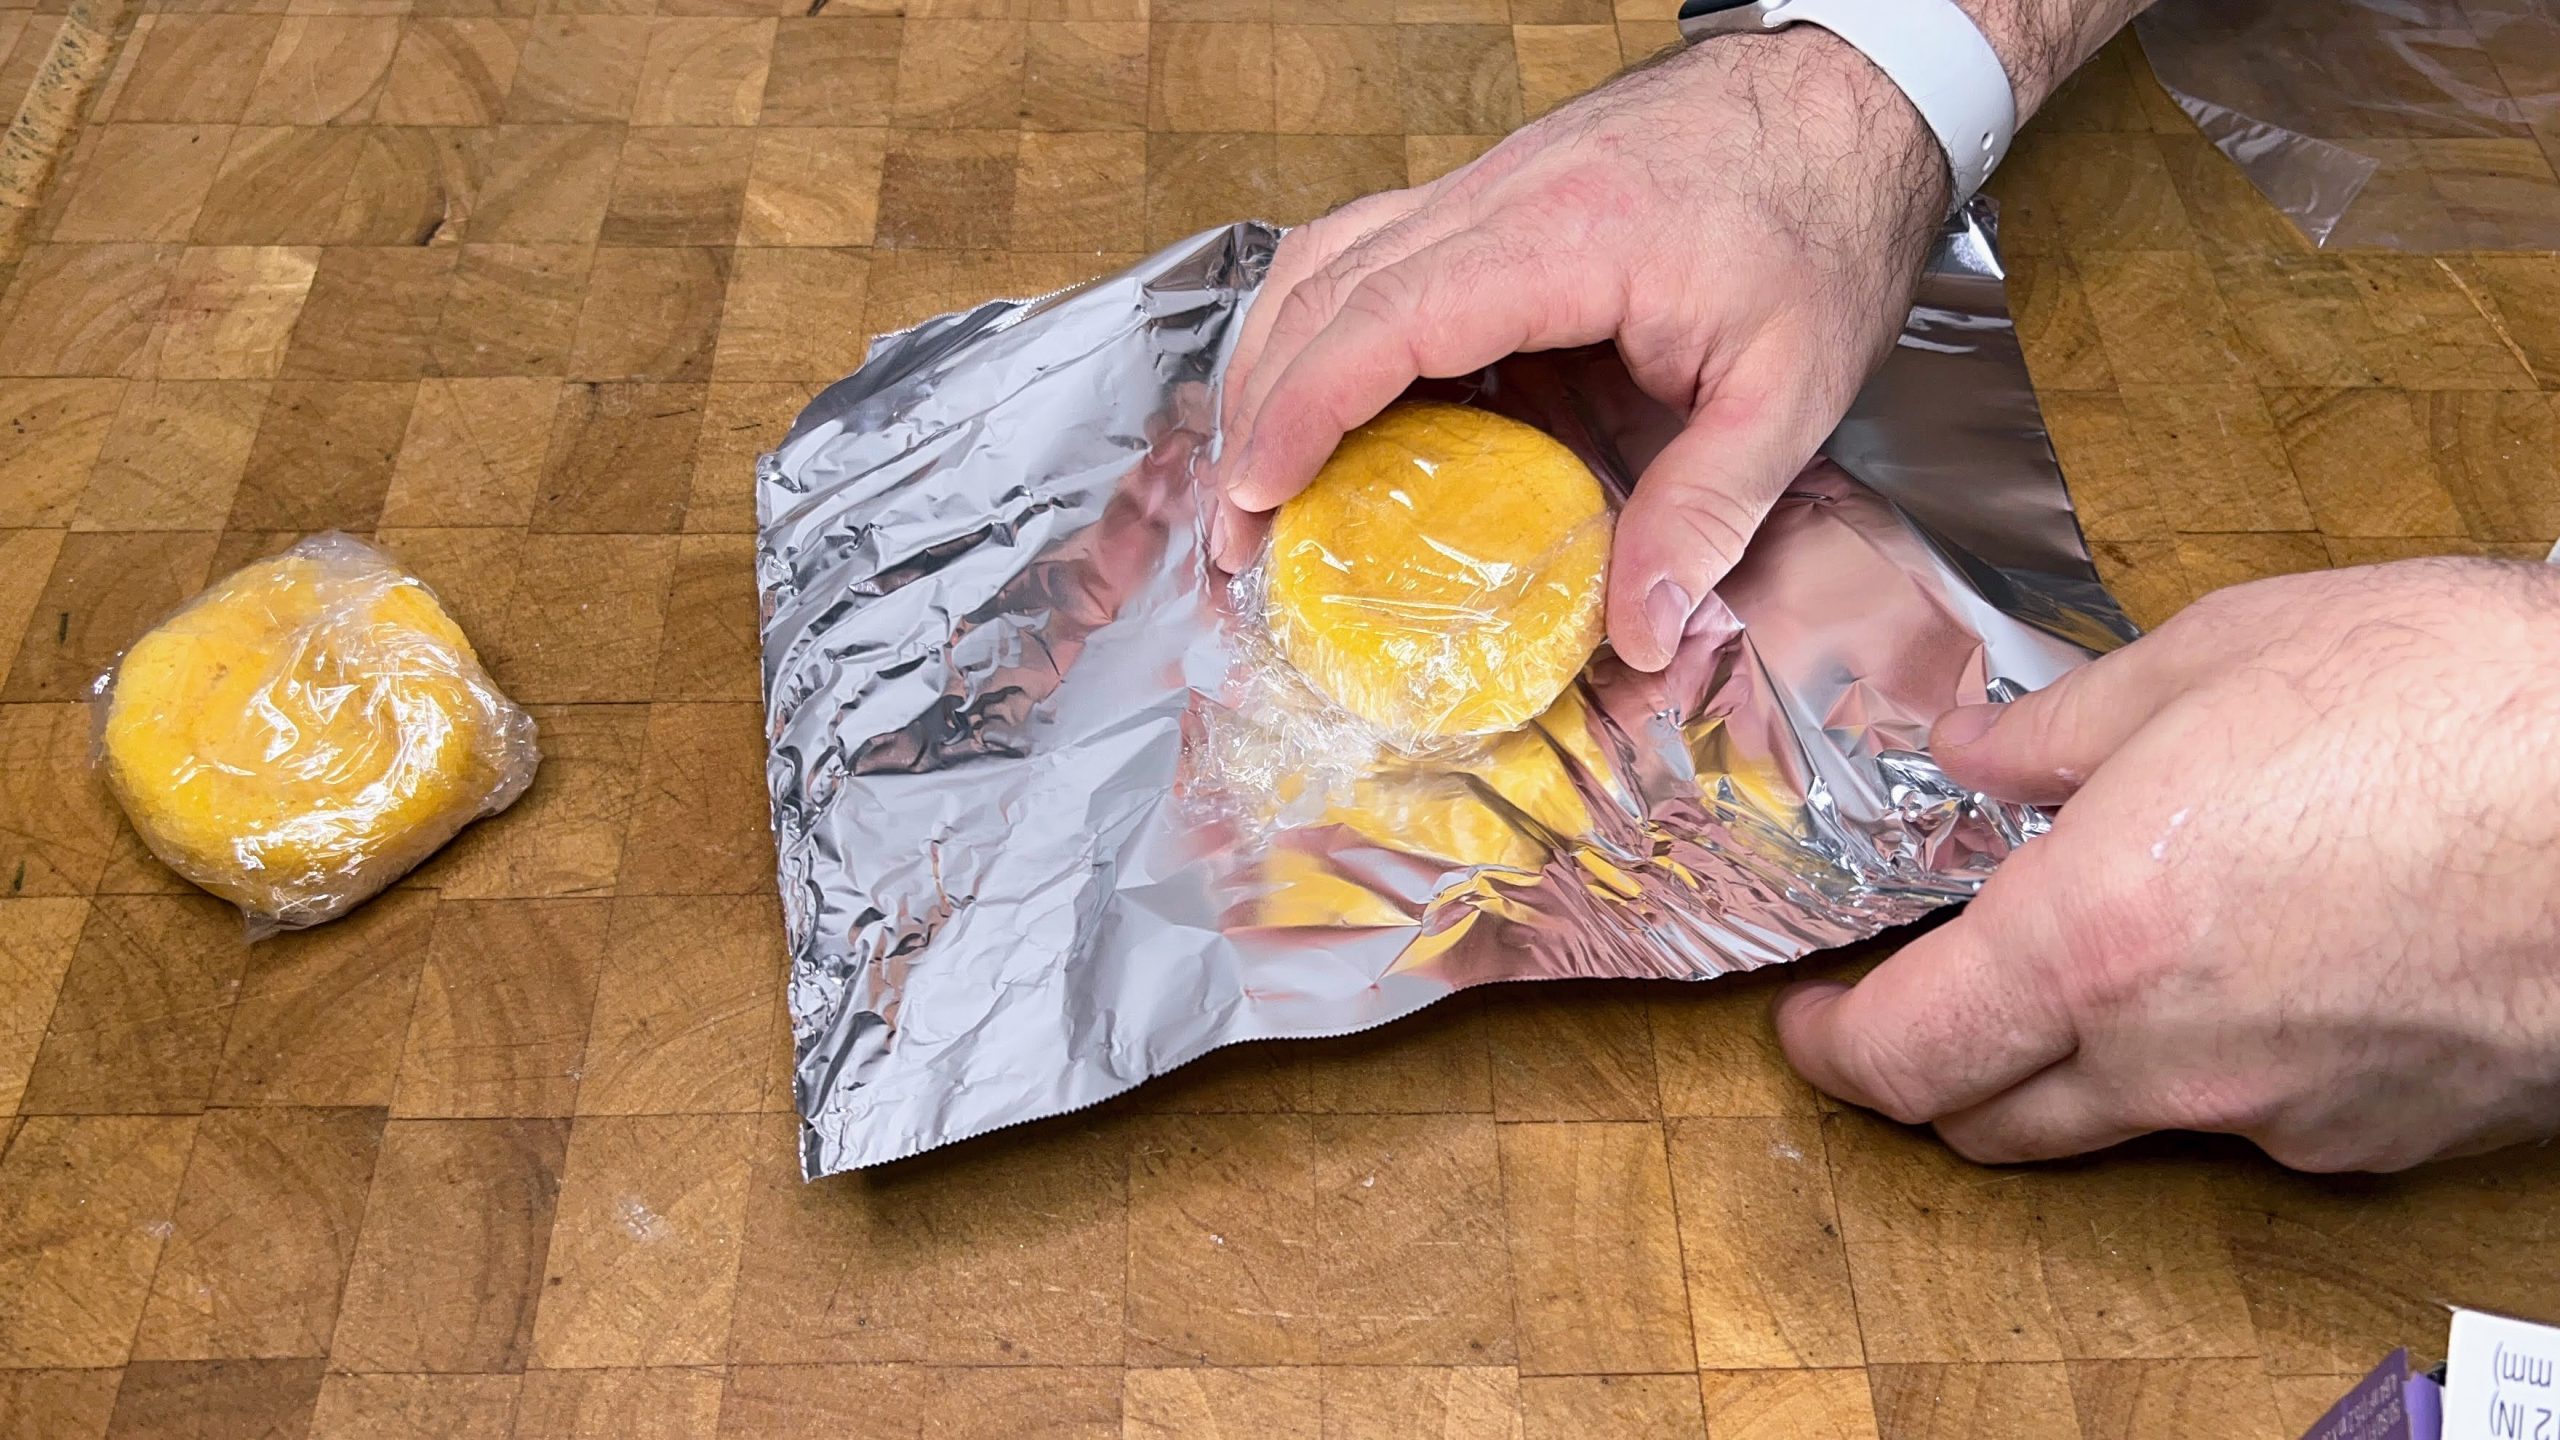 wrapping a slice of sponge cake in aluminum foil